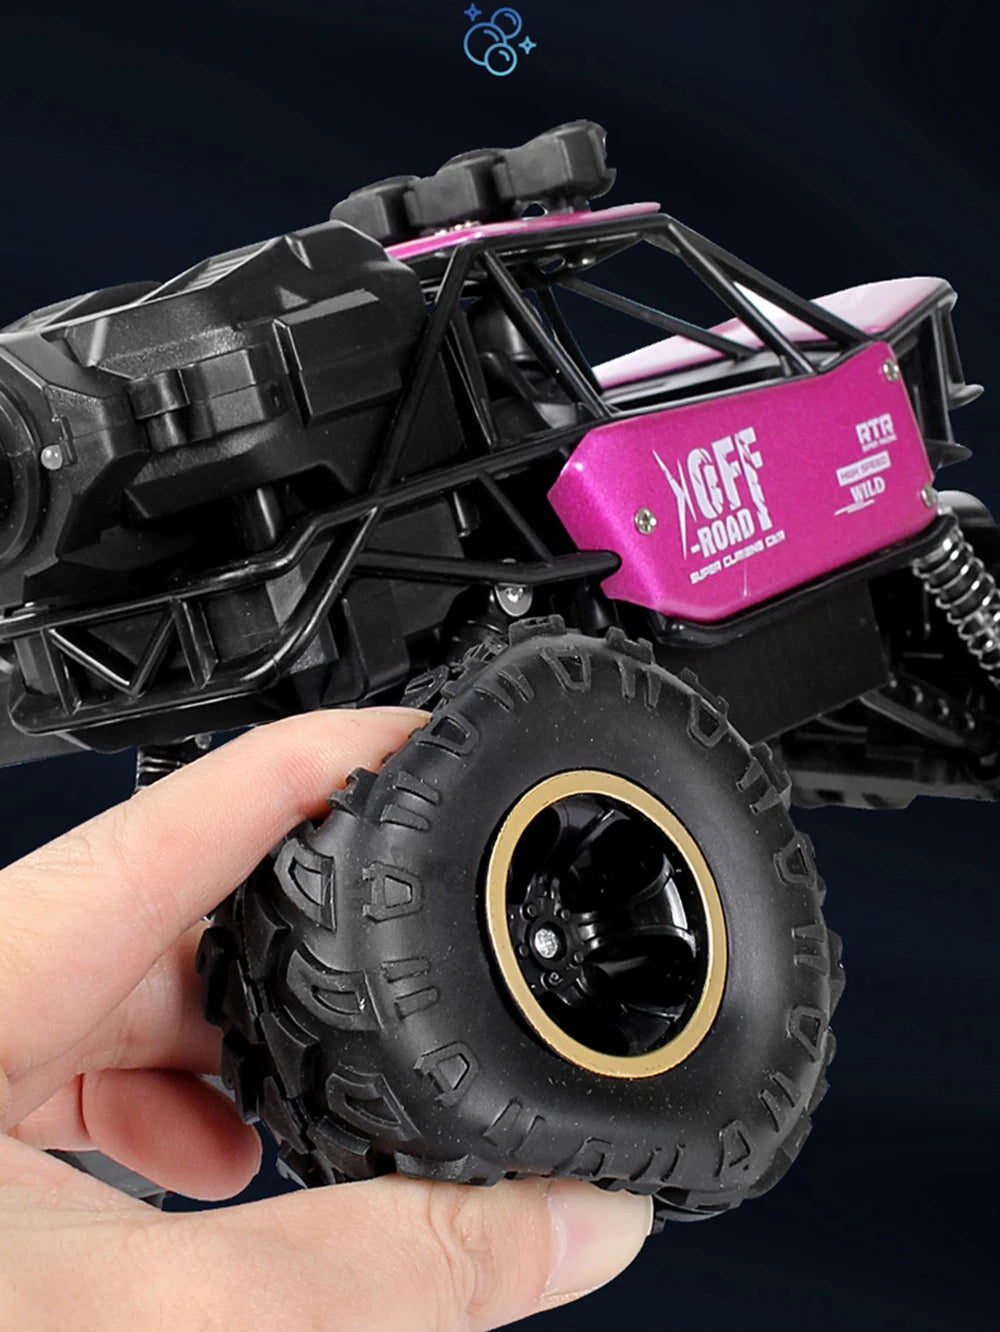 Paisible 4WD RC Car, the 2000mah battery can last about 60 minutes